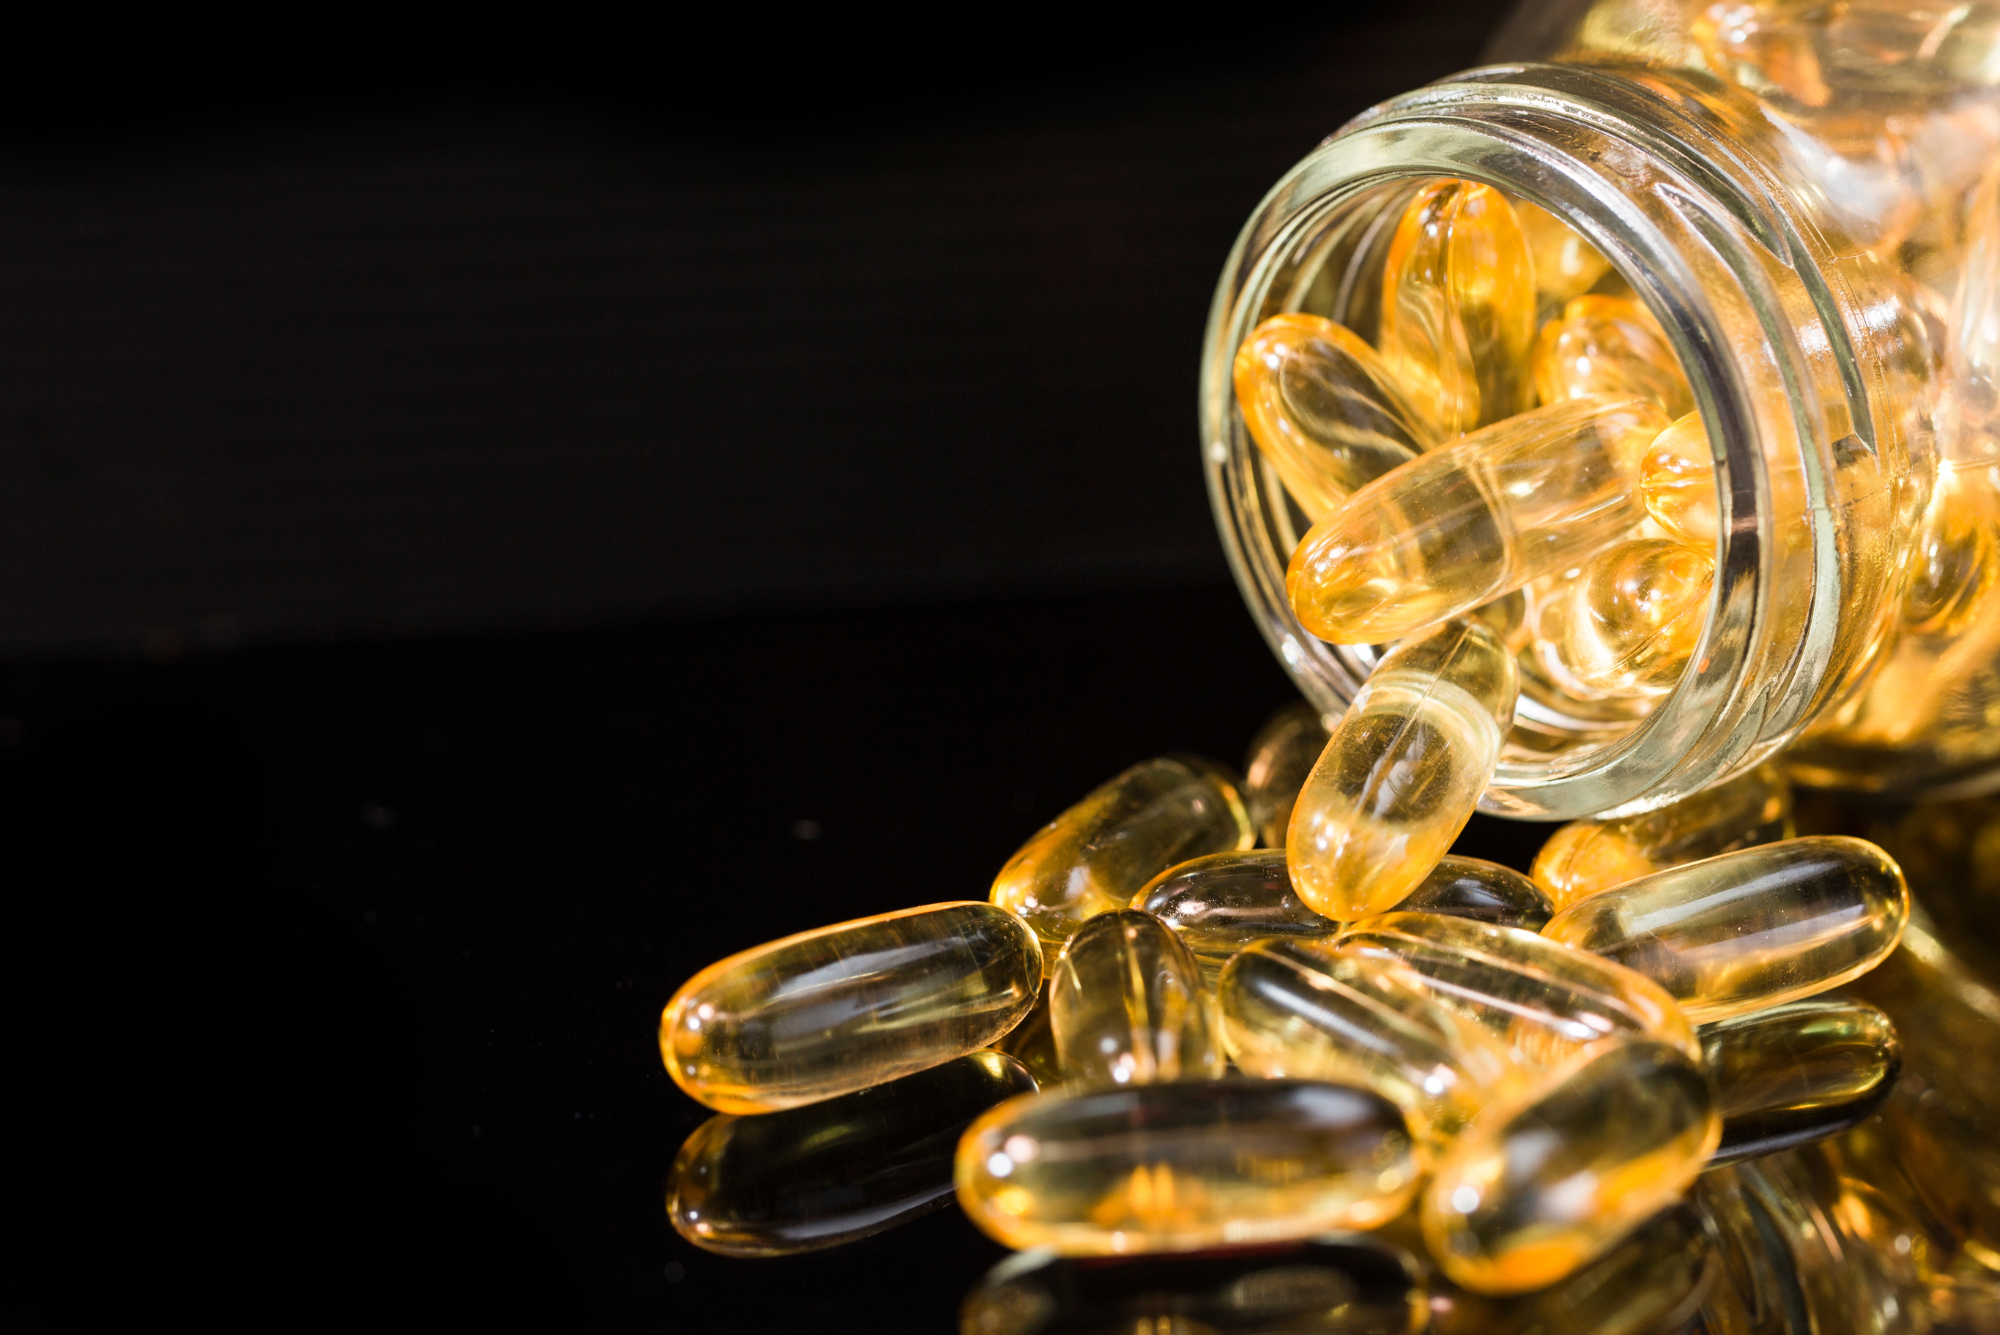 A handful of fish oil capsules spill out of a clear glass pill bottle that is tipped over on a black tabletop.